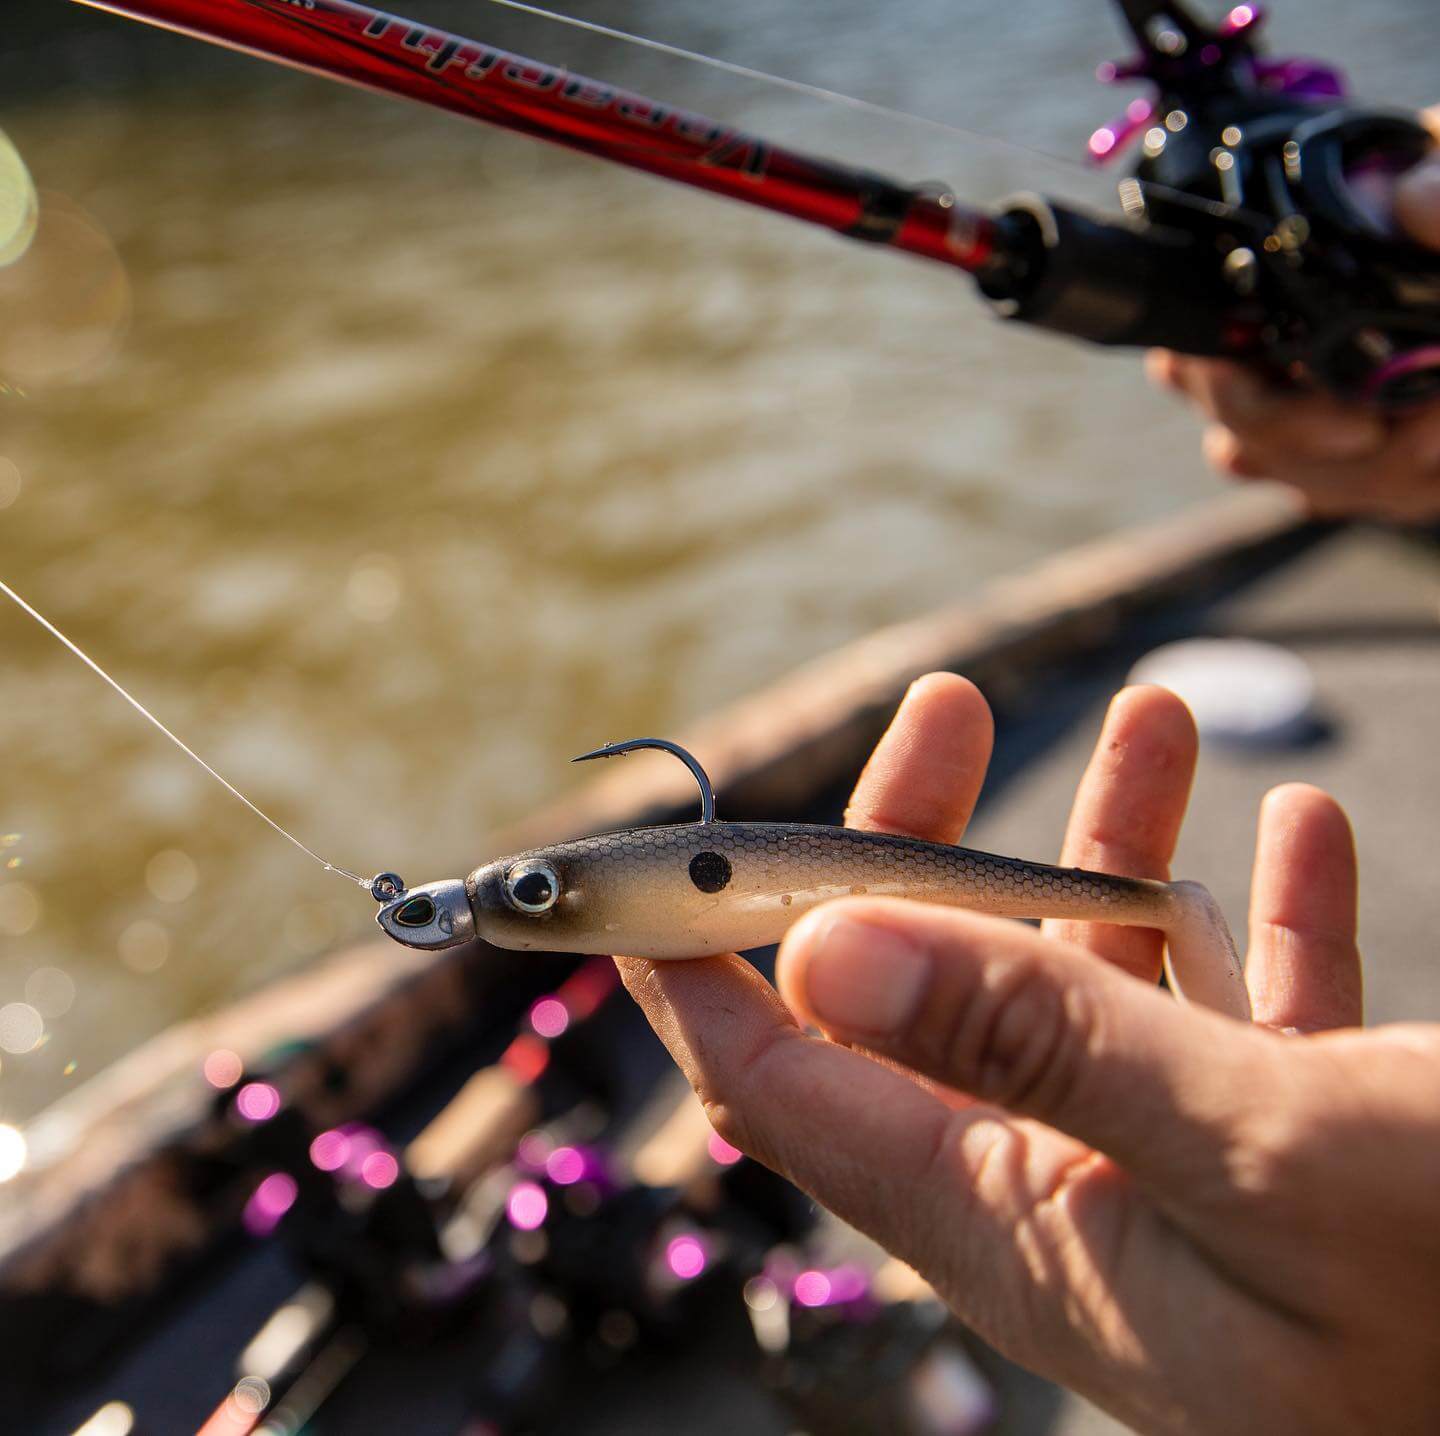 Test and opinions on the brand's fishing lures Berkley - Leurre de